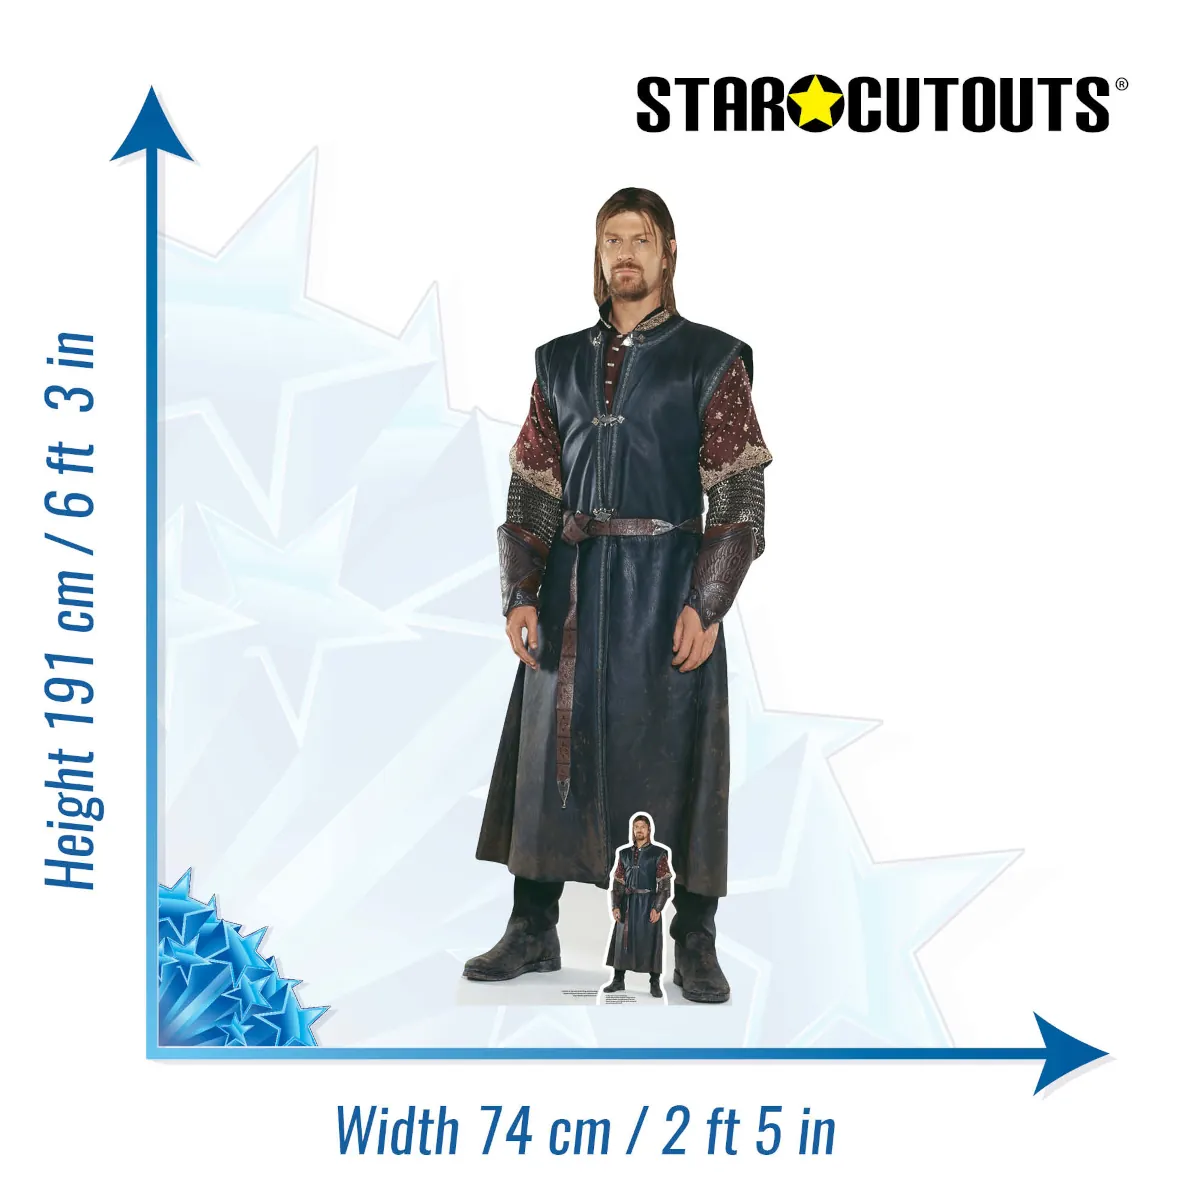 SC4133 Boromir (The Lord of the Rings) Official Lifesize + Mini Cardboard Cutout Standee Size